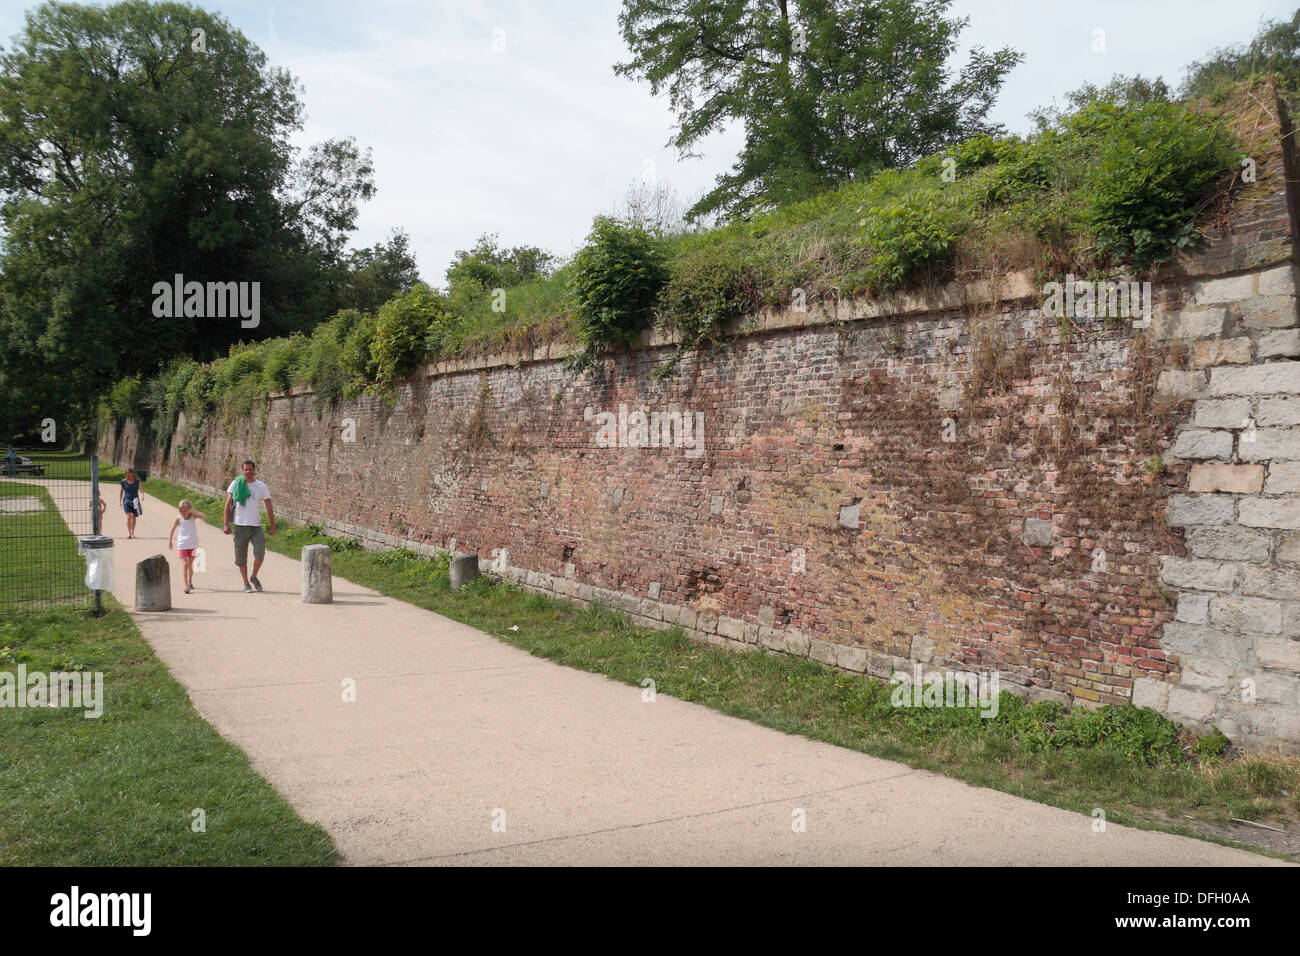 Part of the external wall of the Citadel of Lille (The' Queen of the Citadels') by Vauban in Lille, Nord-Pas-de-Calais, France. Stock Photo